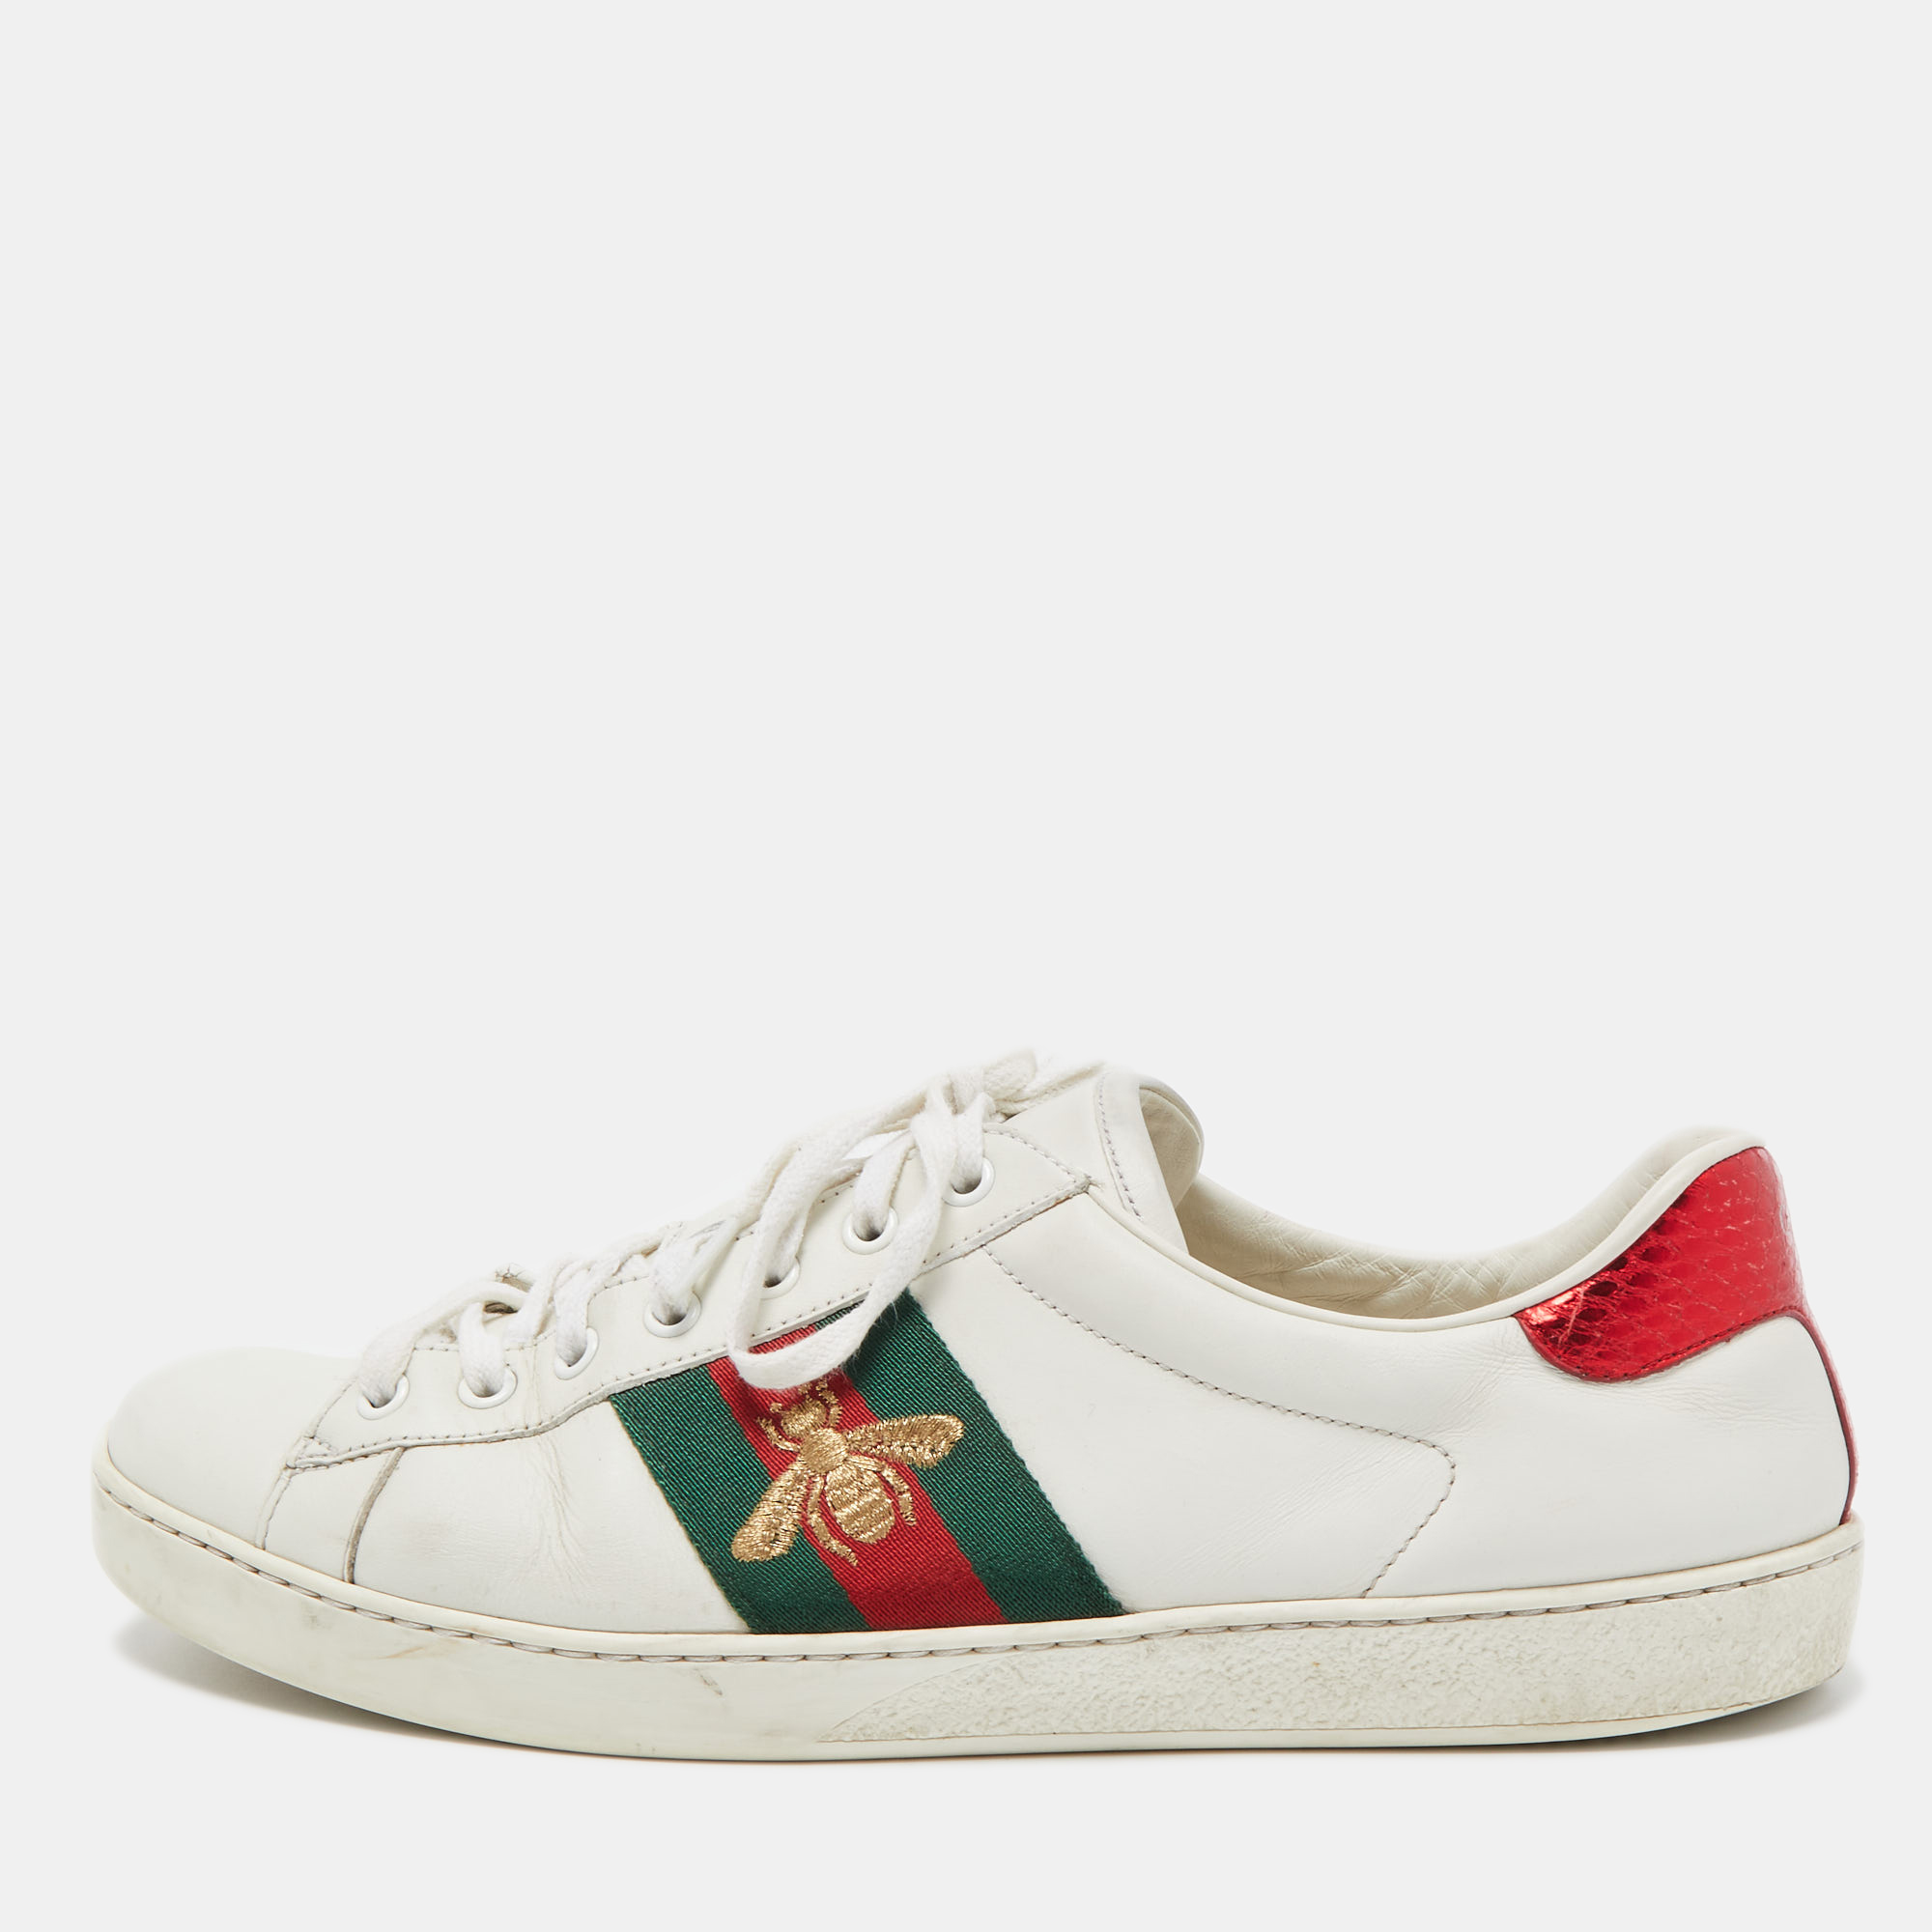 Pre-owned Gucci White Leather Embroidered Bee Ace Trainers Size 43